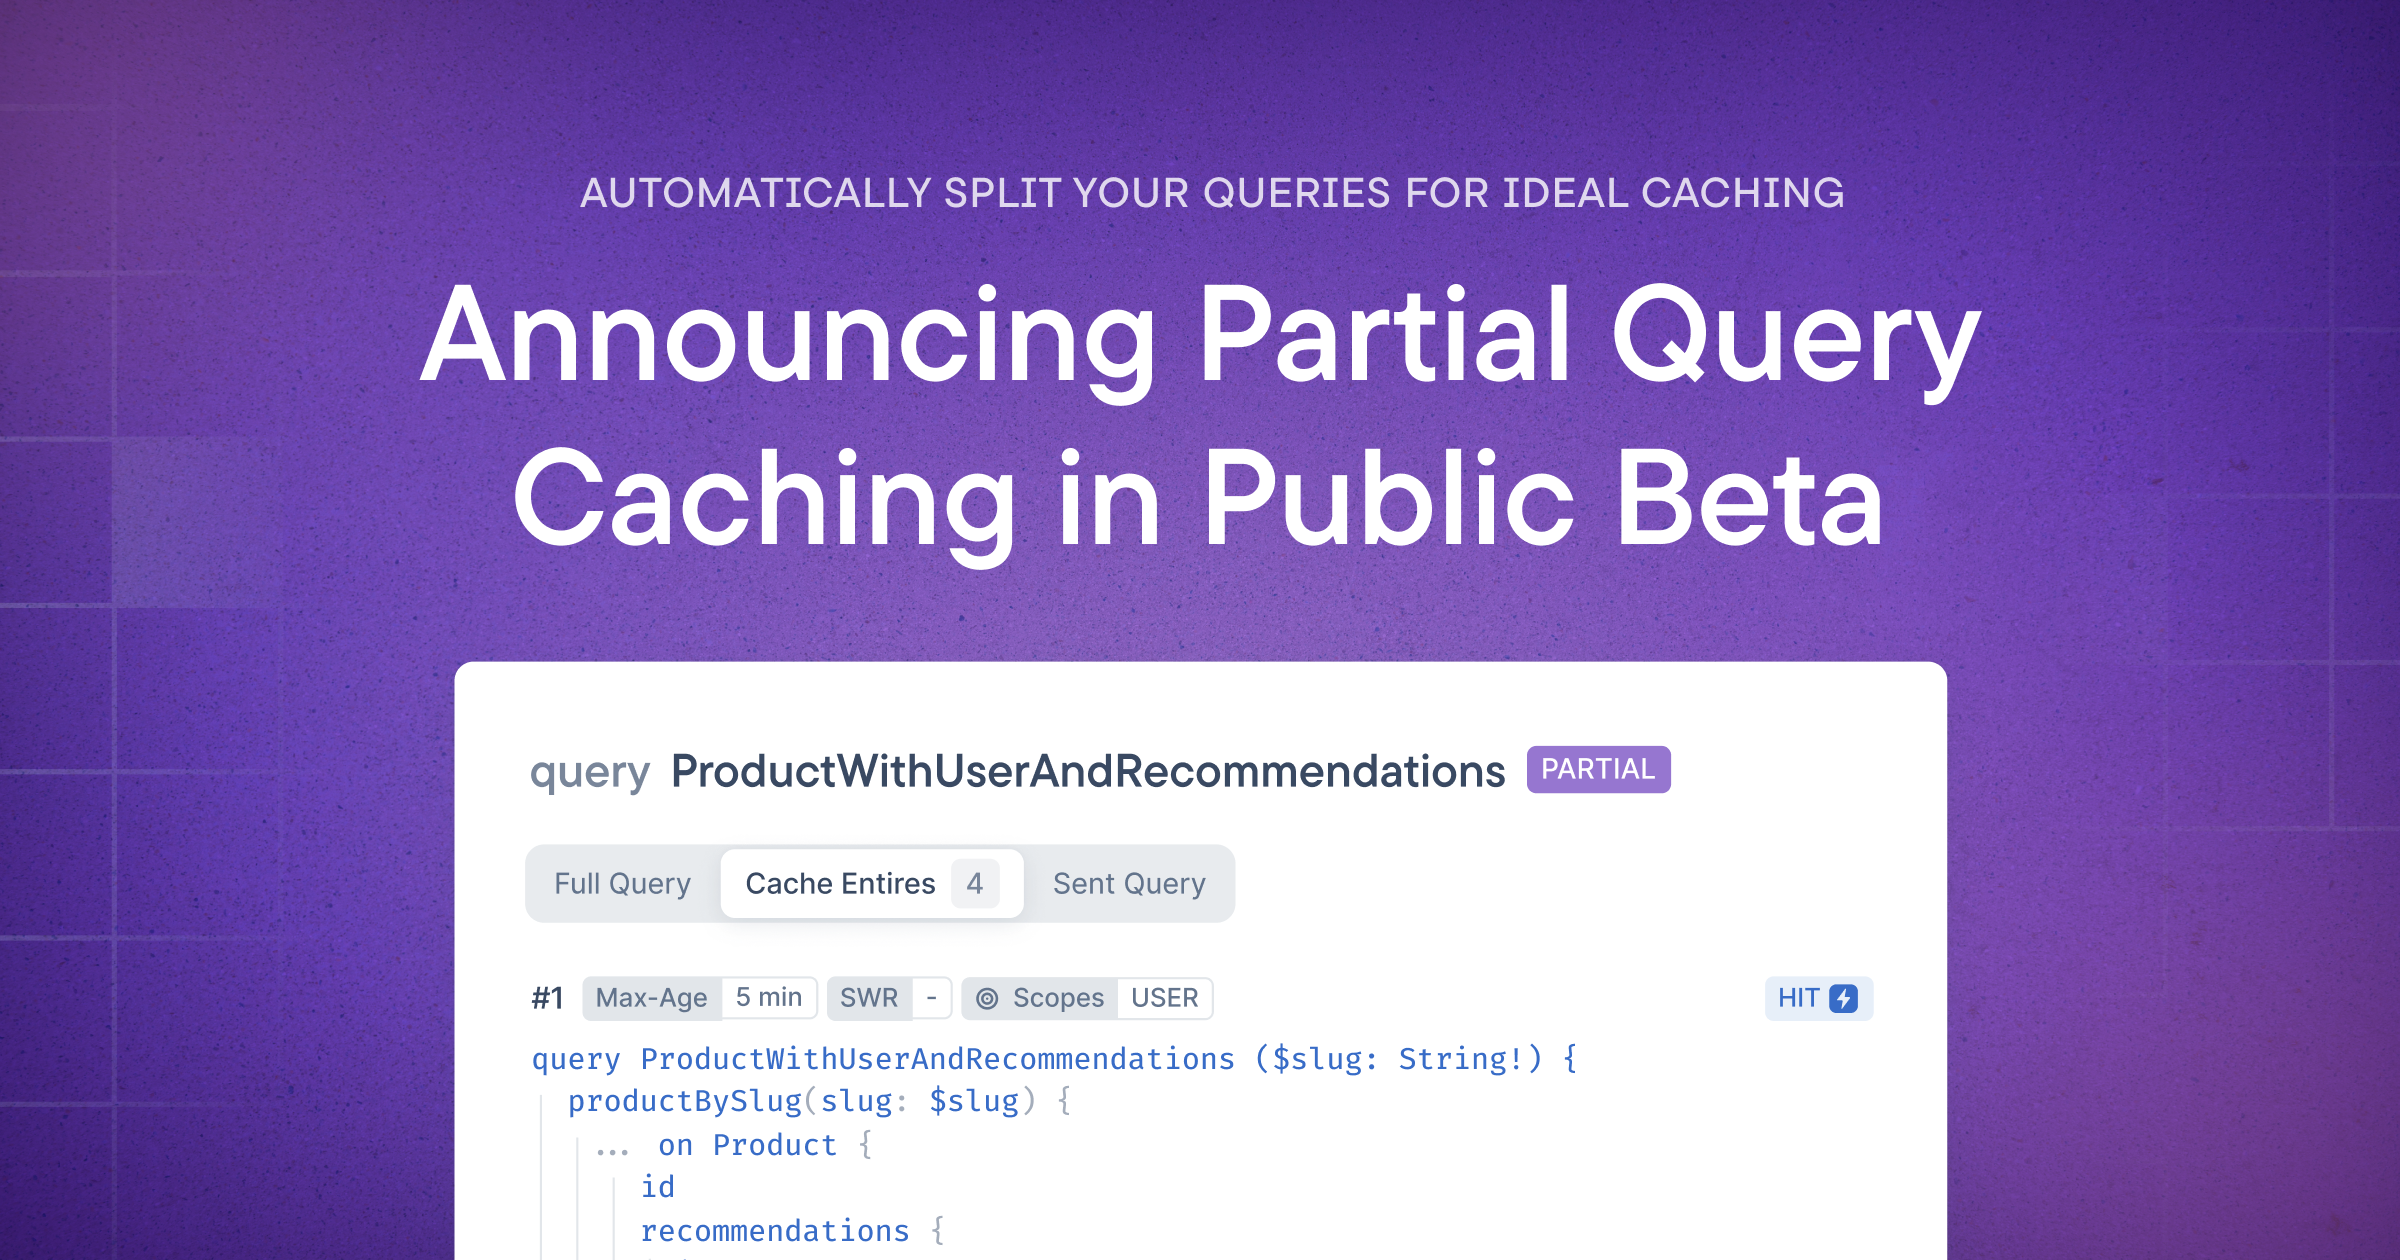 Partial Query Caching is now in Public Beta